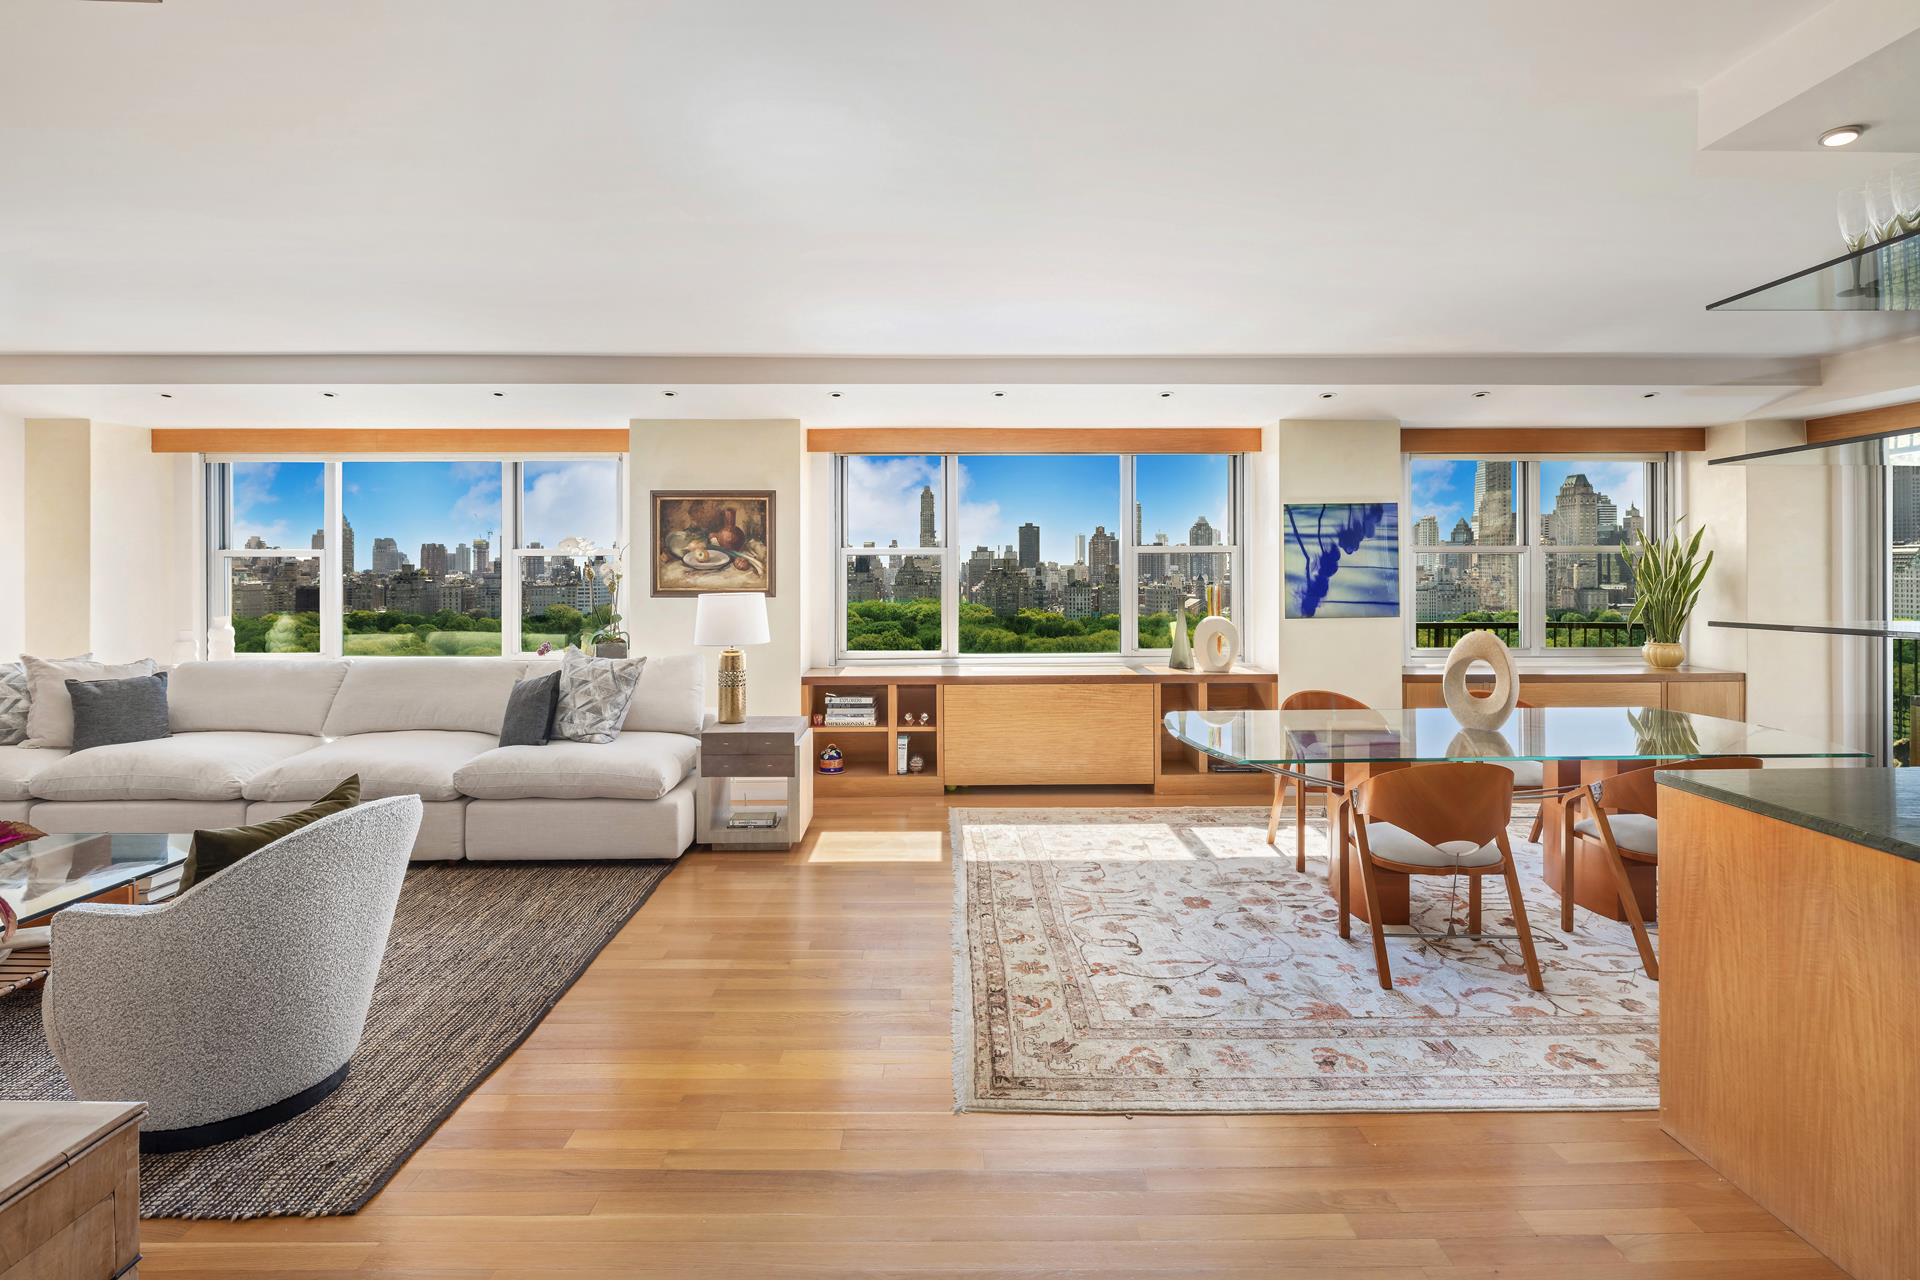 80 Central Park 22Ab, Lincoln Sq, Upper West Side, NYC - 3 Bedrooms  
3 Bathrooms  
6 Rooms - 